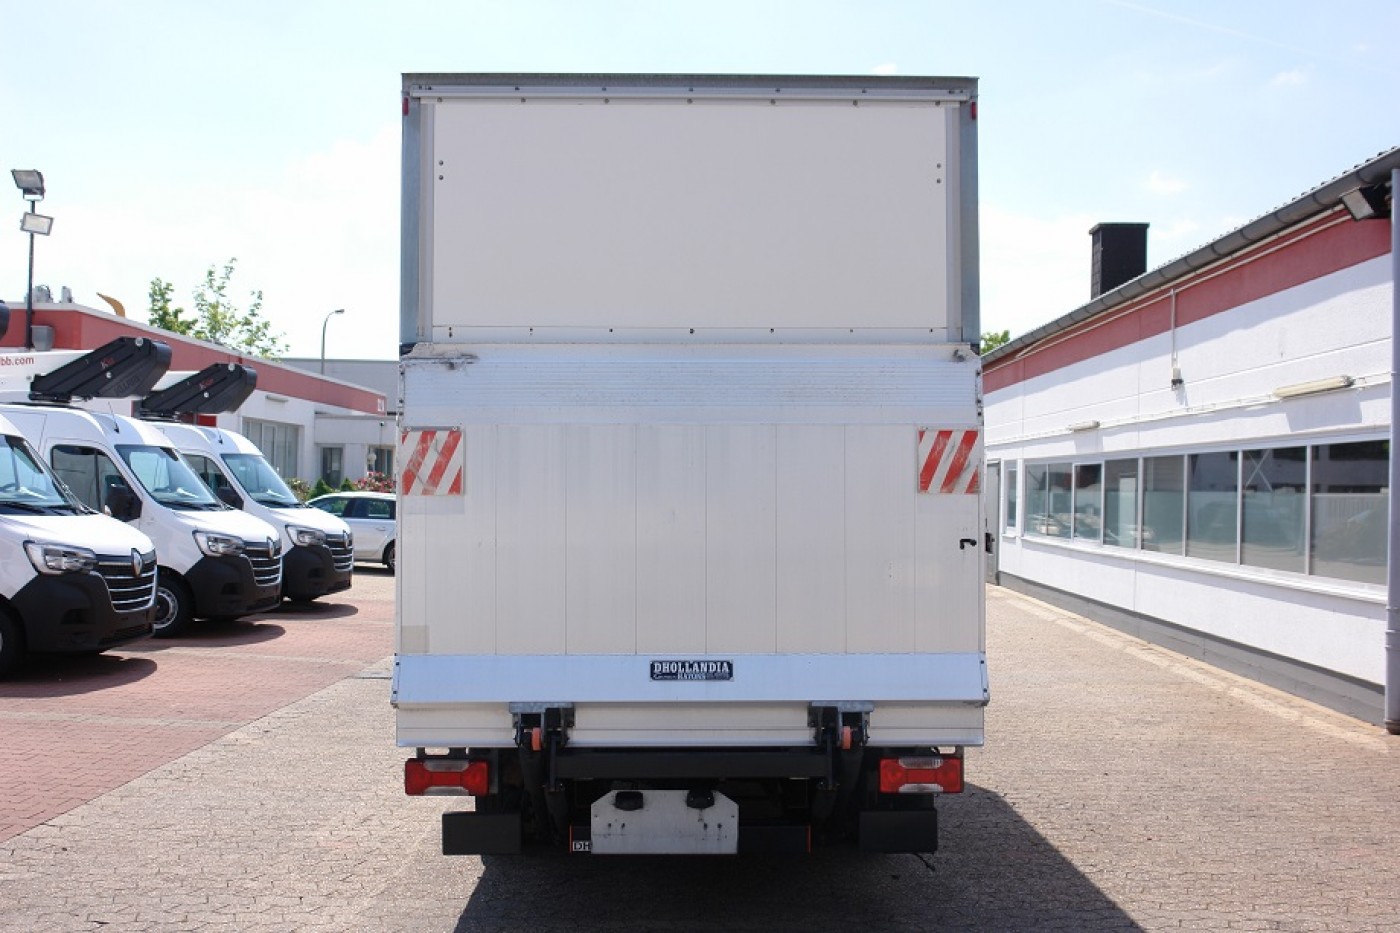 Iveco Daily 35C13 Koffer air condition sidedoor tail lift Dhollandia EURO5 TÜV!